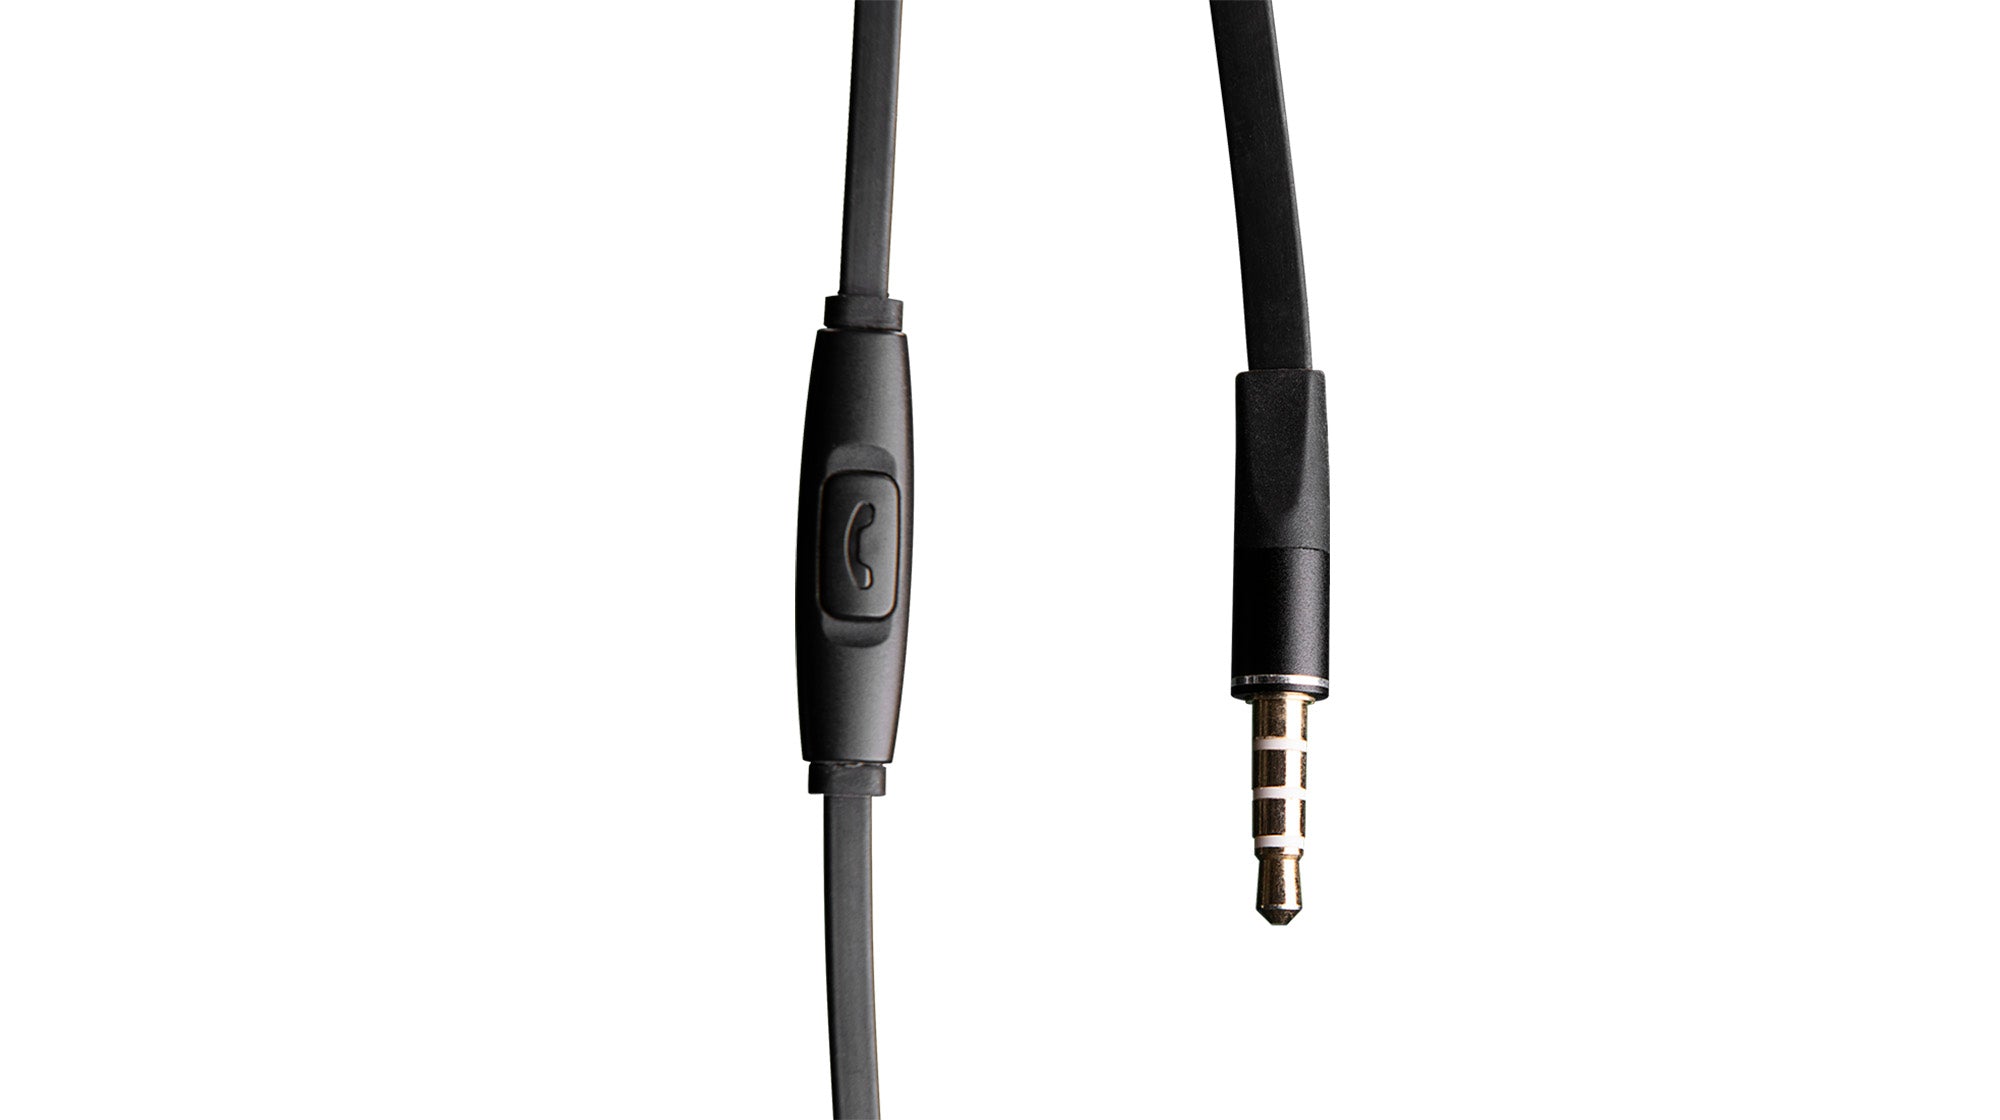 Mackie CR-BUDS High Performance Earphones with Mic and Control Mackie